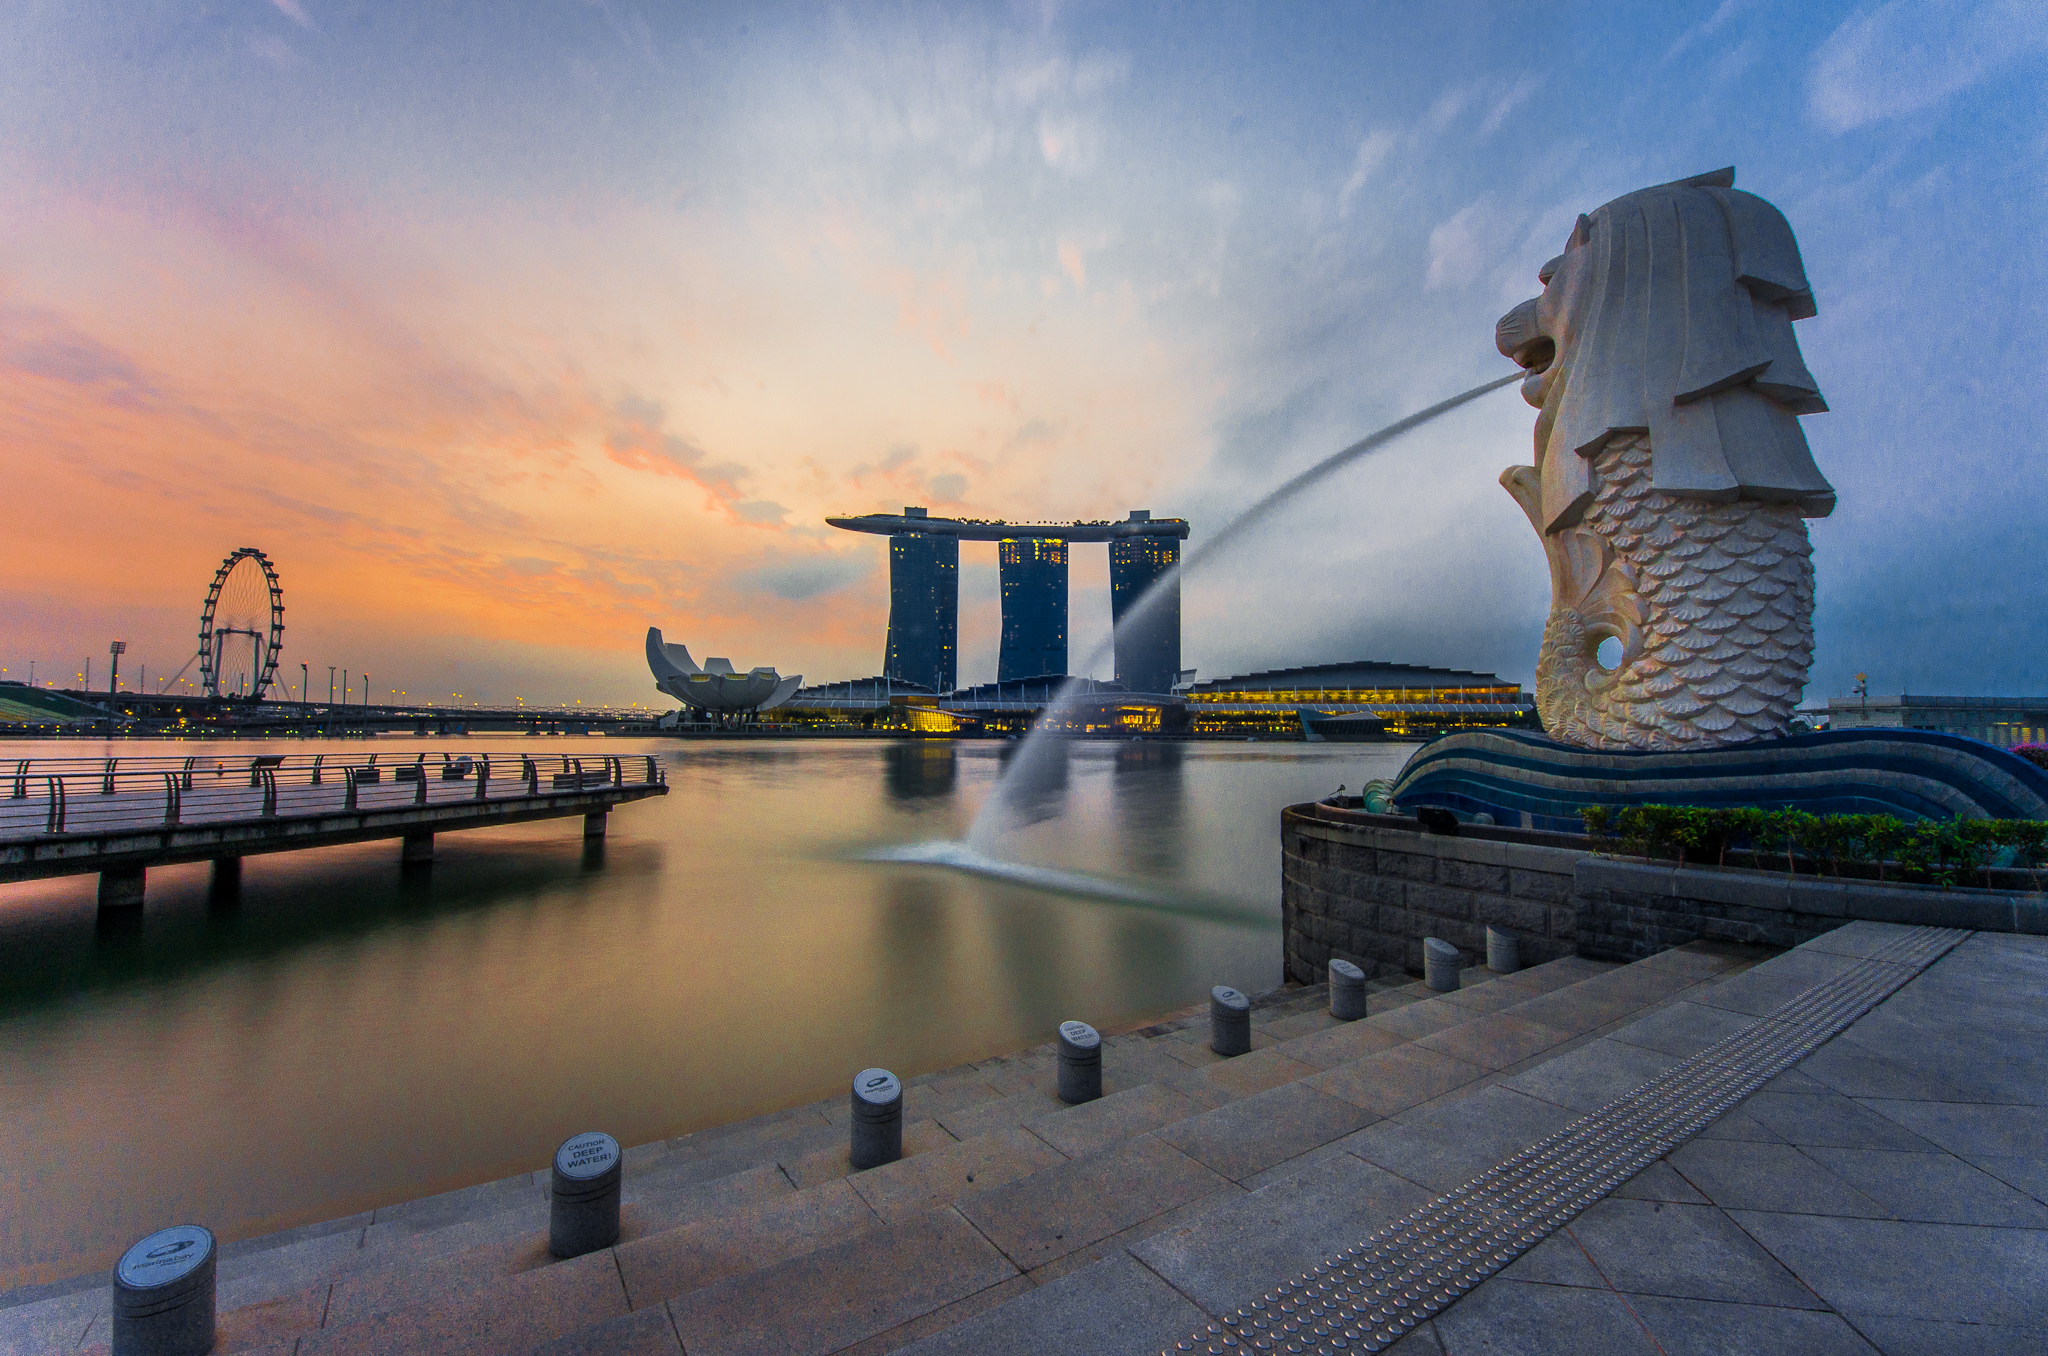 File:Rear view of the Merlion statue at Merlion Park, Singapore ...